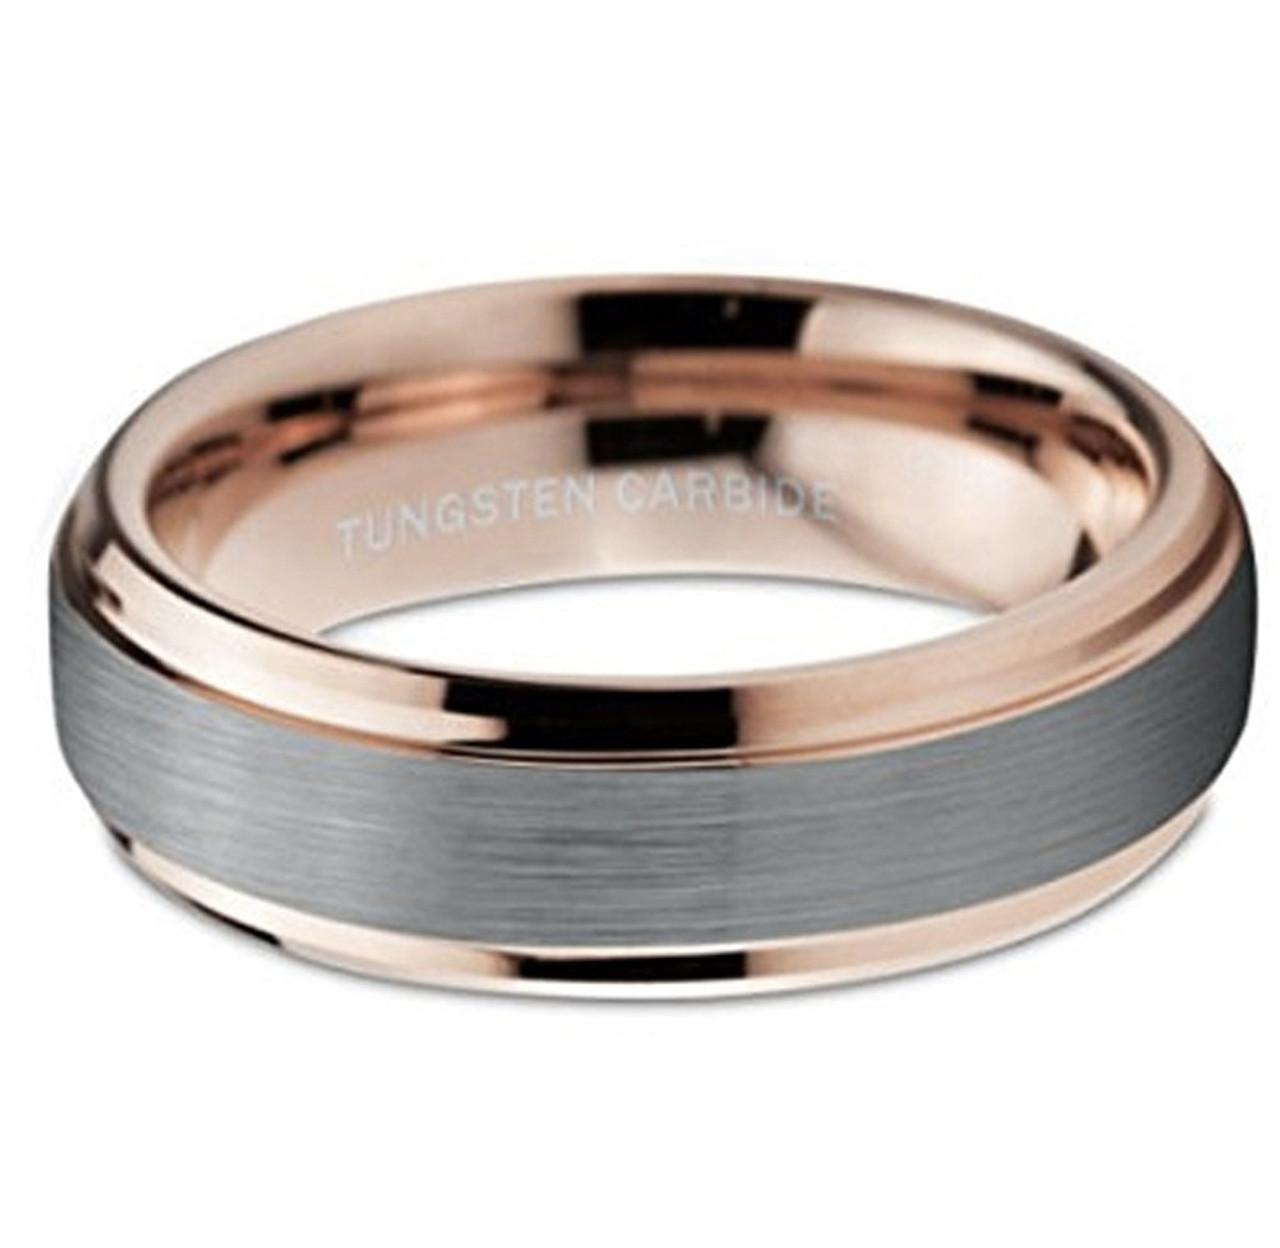 (6mm) Unisex, Men's or Women's Silver and Rose Gold Duo Tone Tungsten Carbide Wedding Ring Band. Comfort Fit